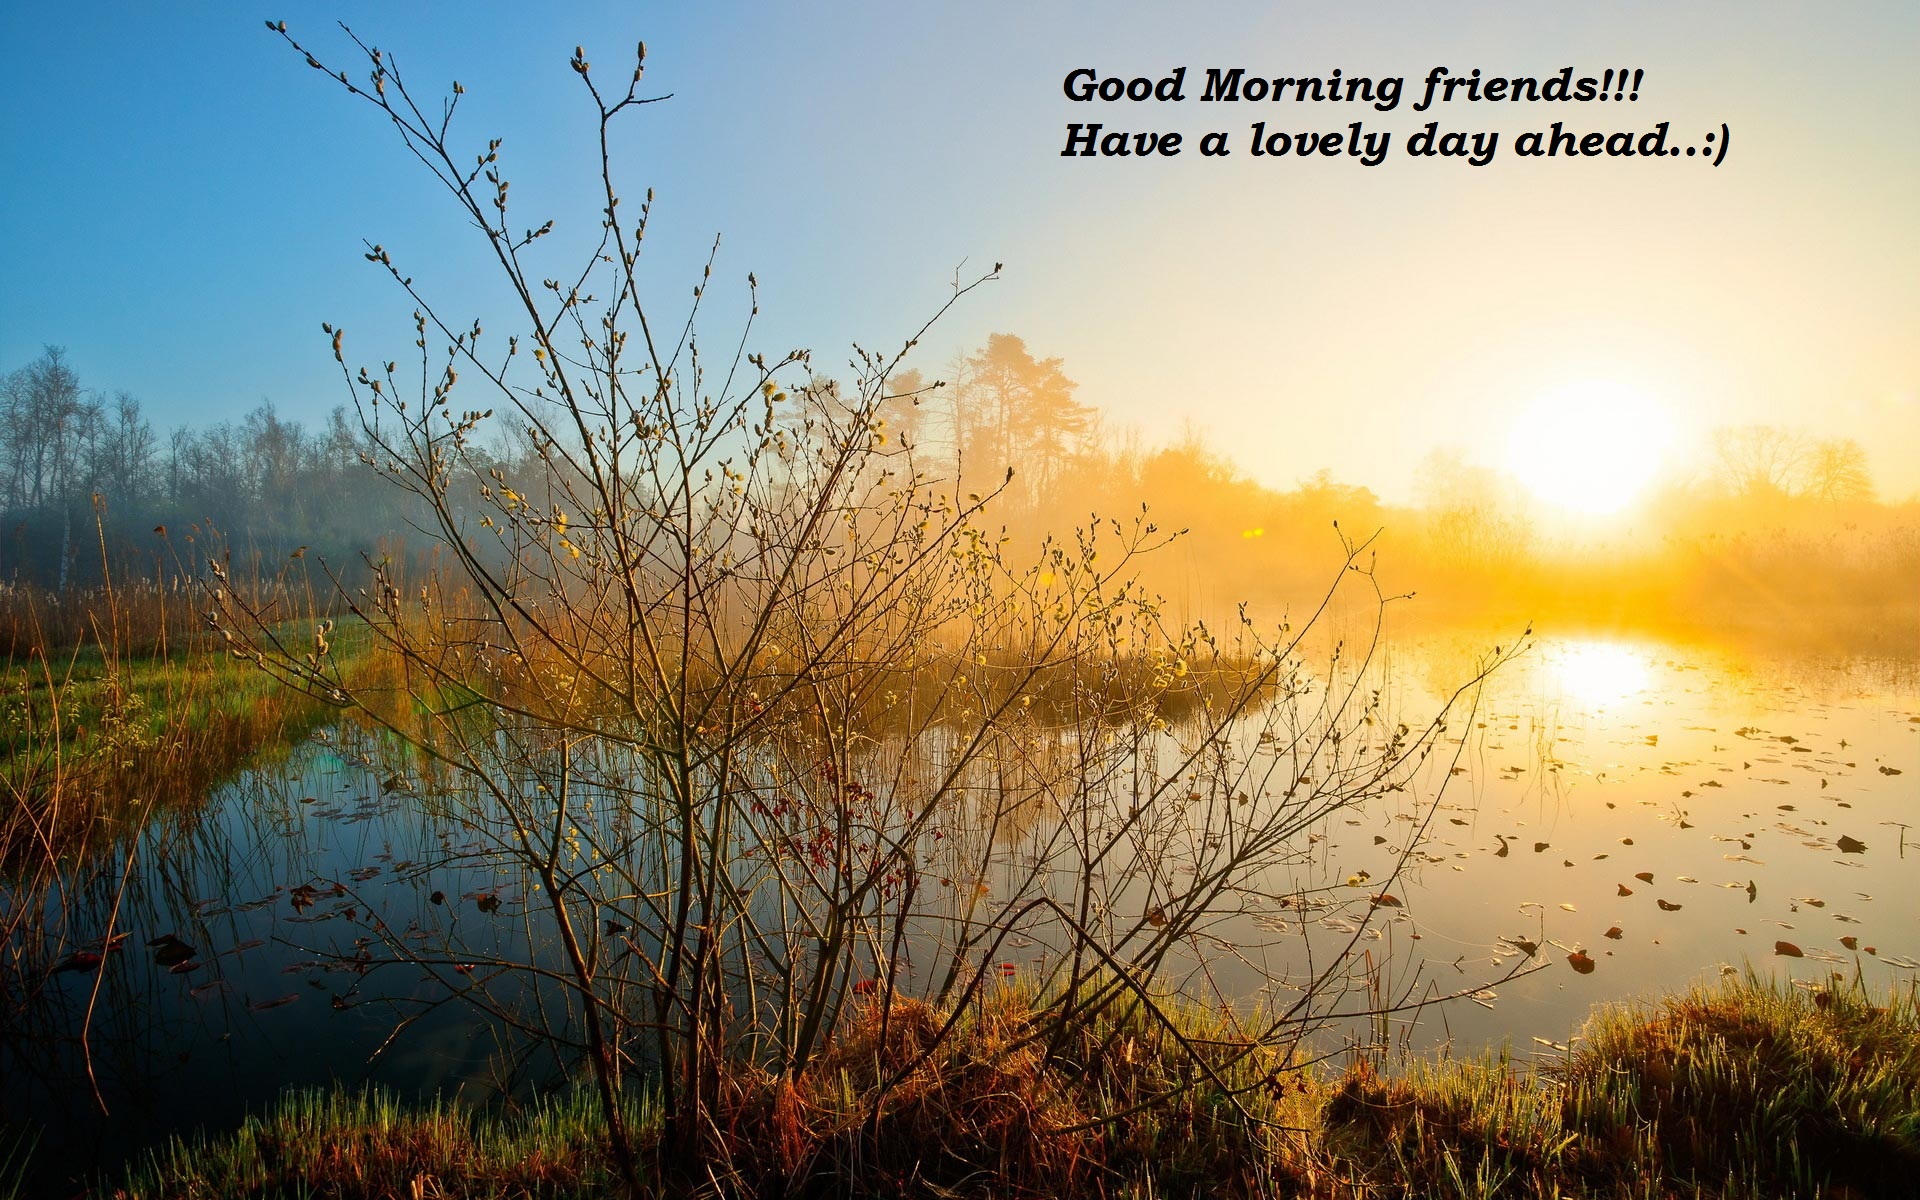 Good morning images download for free with wishes, quotes